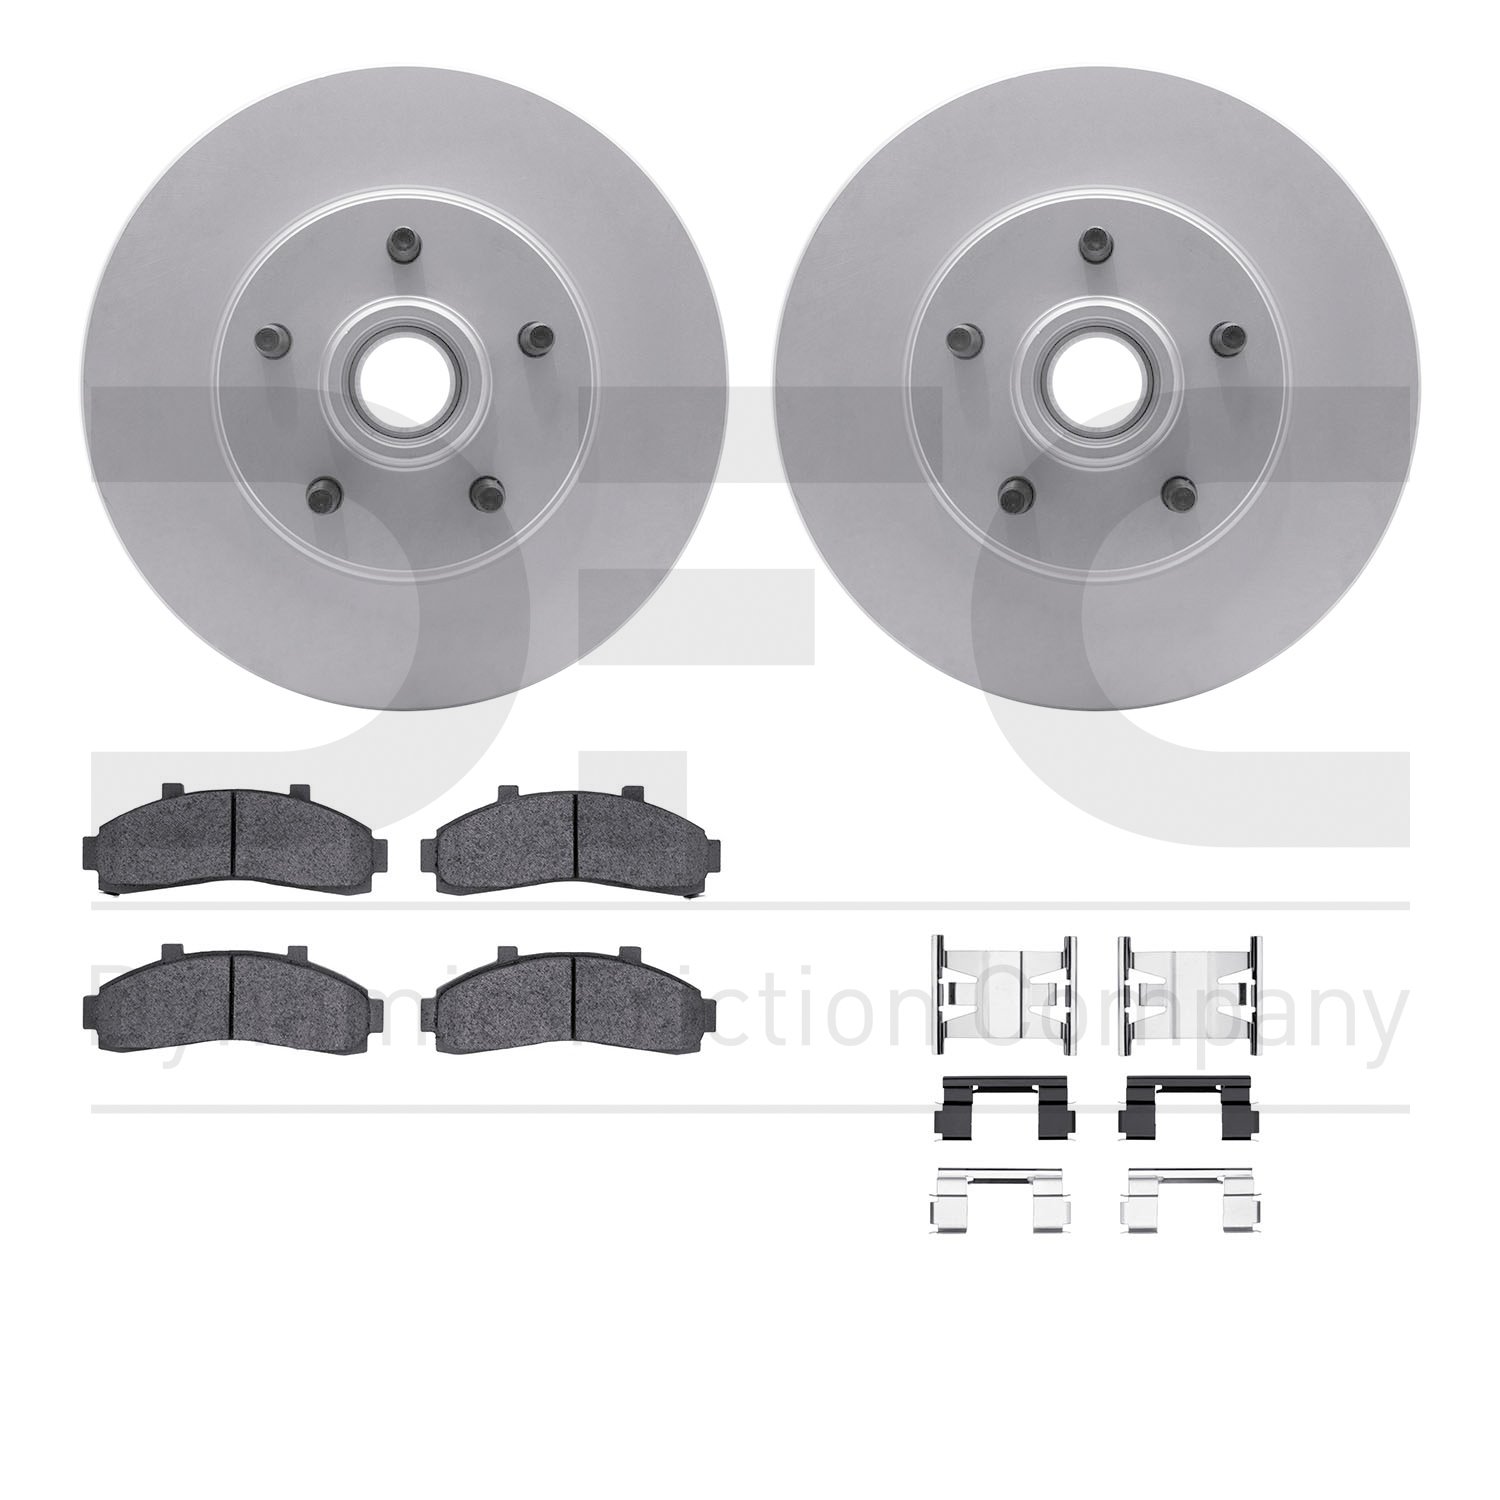 4412-54012 Geospec Brake Rotors with Ultimate-Duty Brake Pads & Hardware, 1995-2002 Ford/Lincoln/Mercury/Mazda, Position: Front